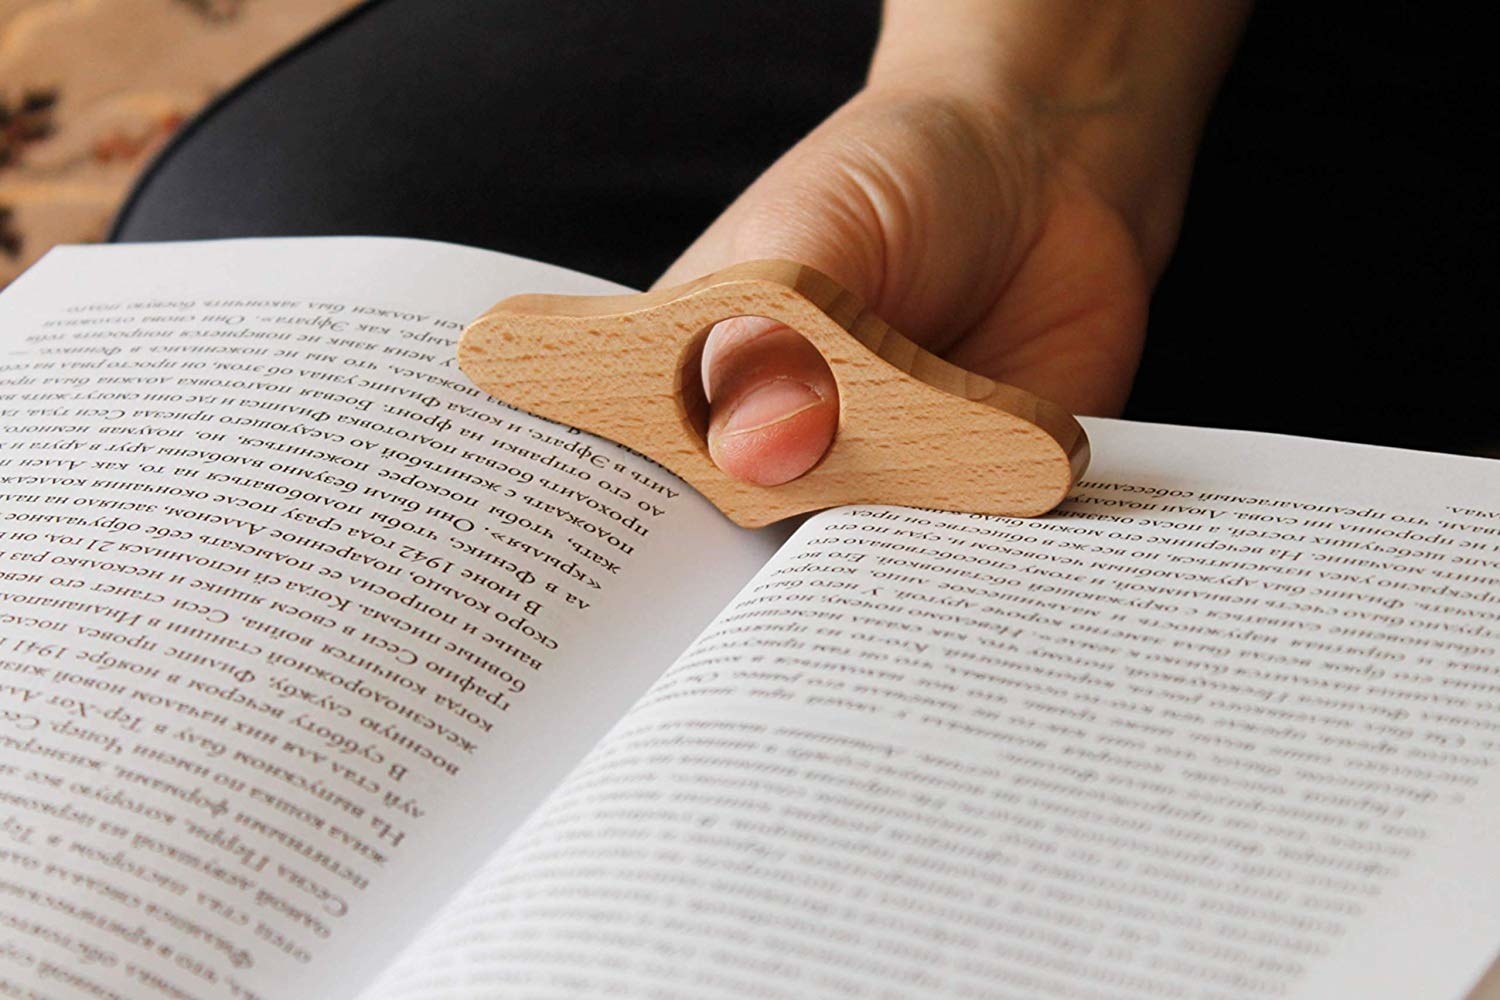 A model using the page holder to hold open a book